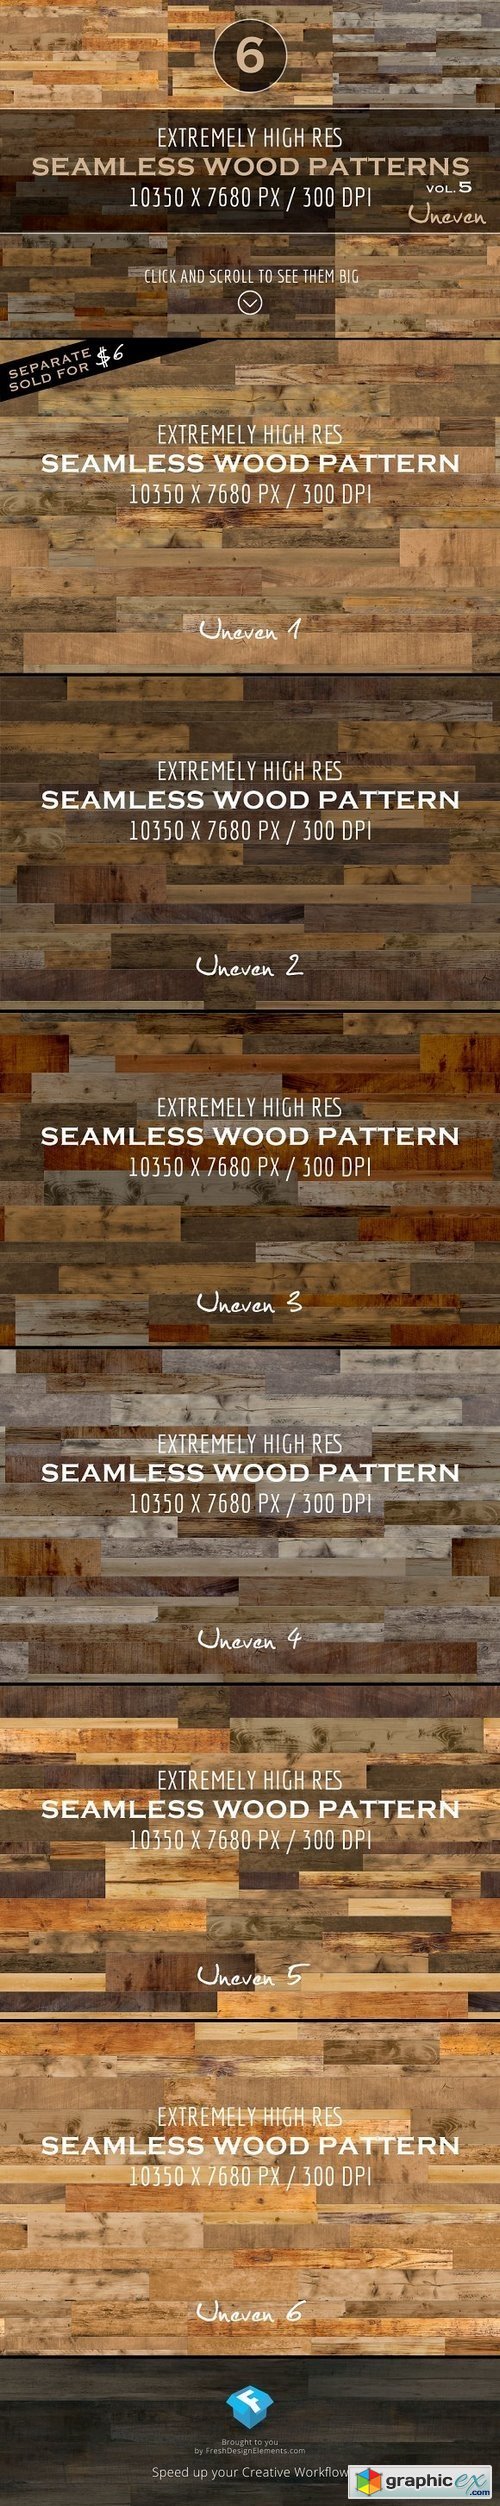 Extremely HR Wood Patterns vol. 5